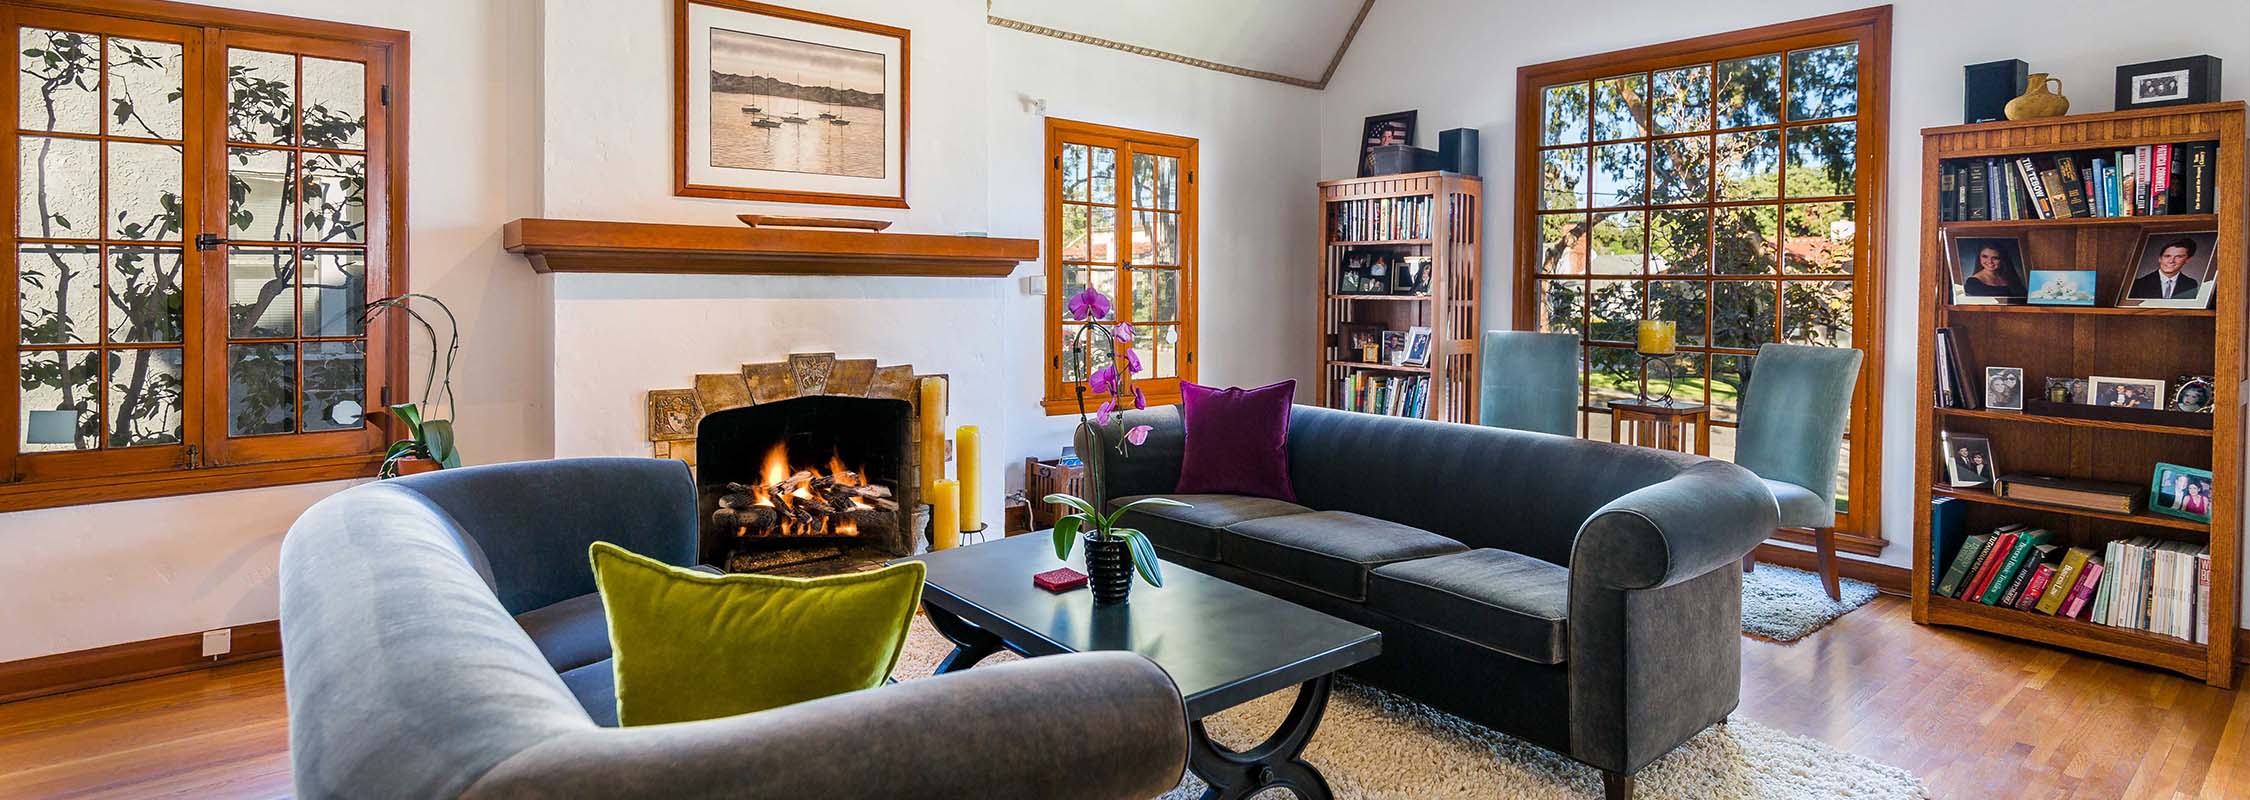 Traditional livingroom with 2 couches and fireplace in Los Angeles